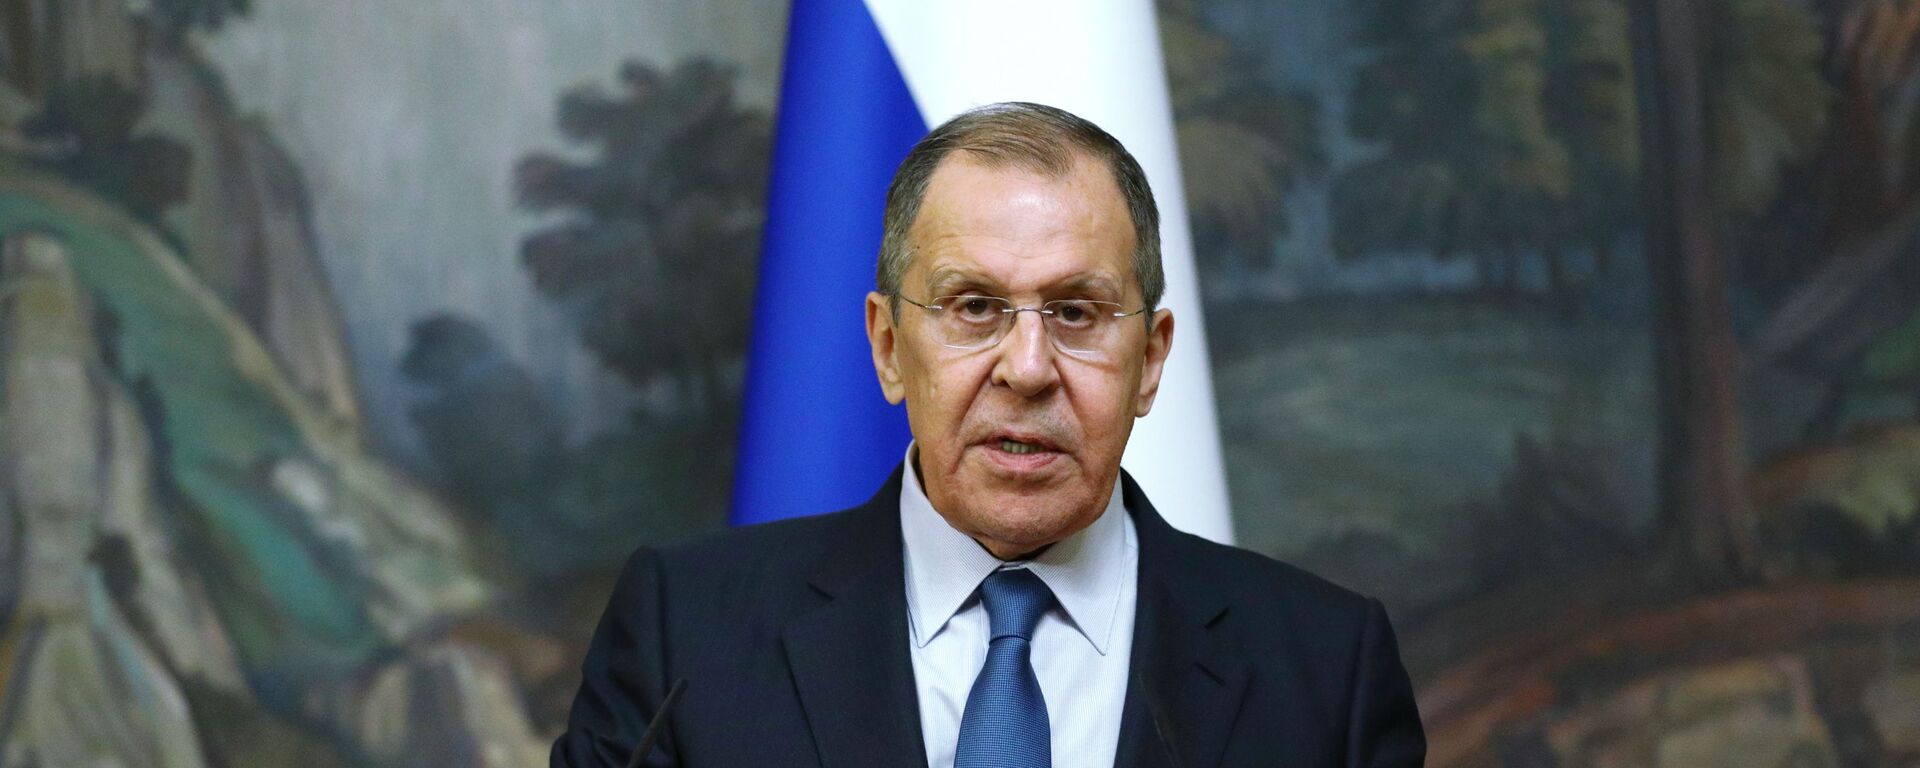 Russian Foreign Minister Sergey Lavrov delivers a joint statement after trilateral talks between Russia, Armenia and Azerbaijan over Nagorno-Karabakh ceasefire, 10 October 2020 - Sputnik International, 1920, 05.02.2021